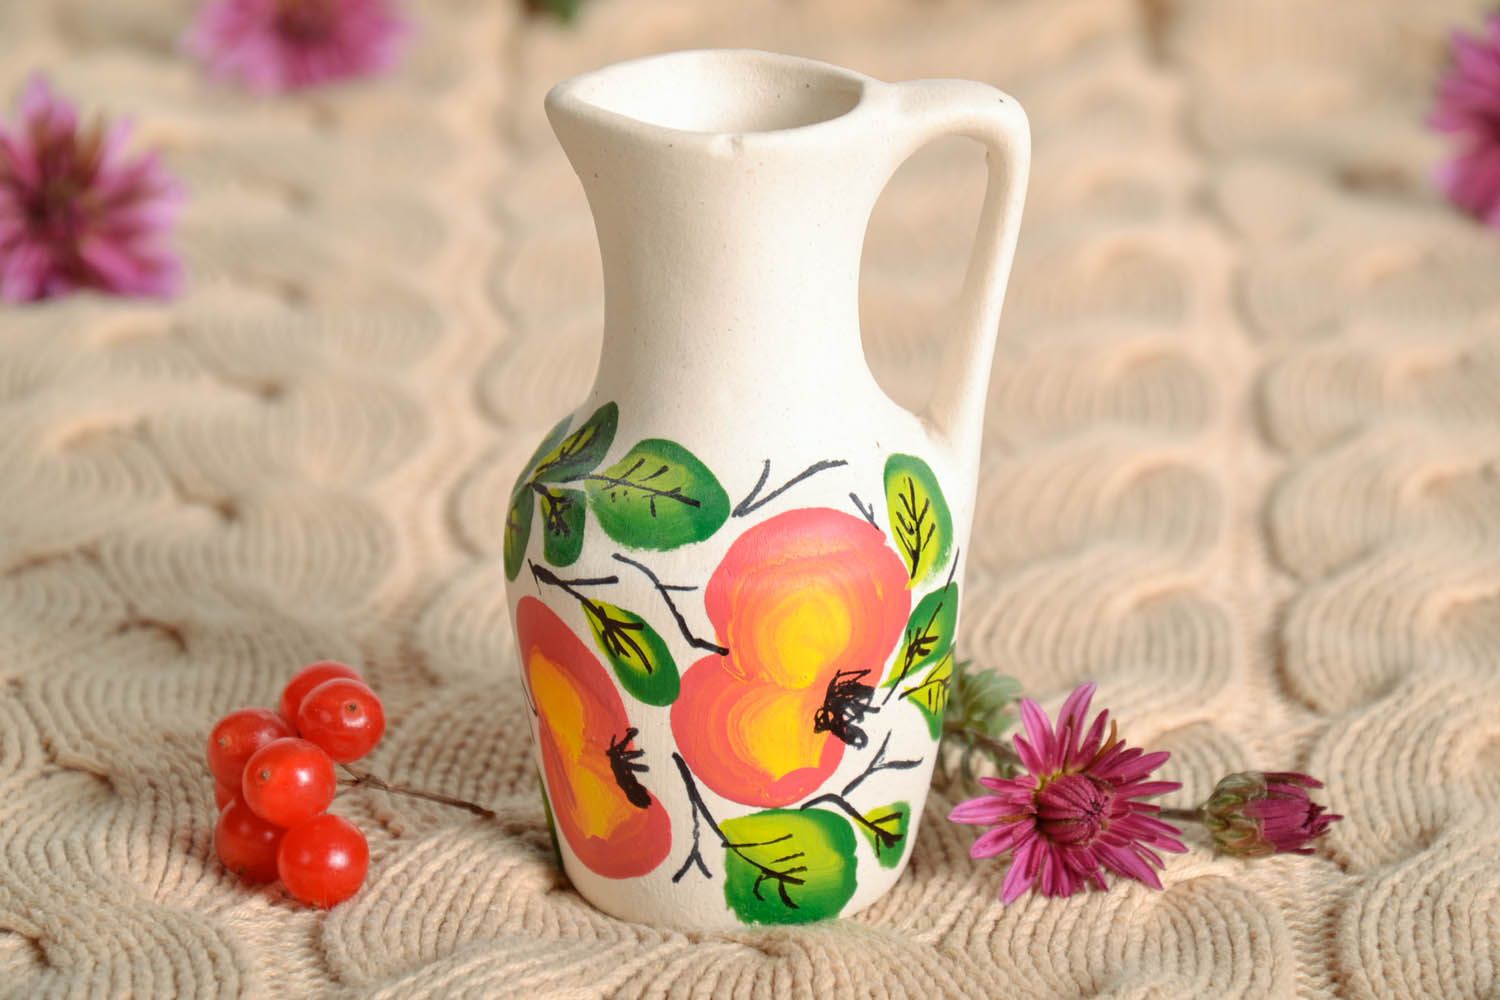 Handmade decorative clay pitcher with handle and handpainted pattern 0,2 lb photo 1